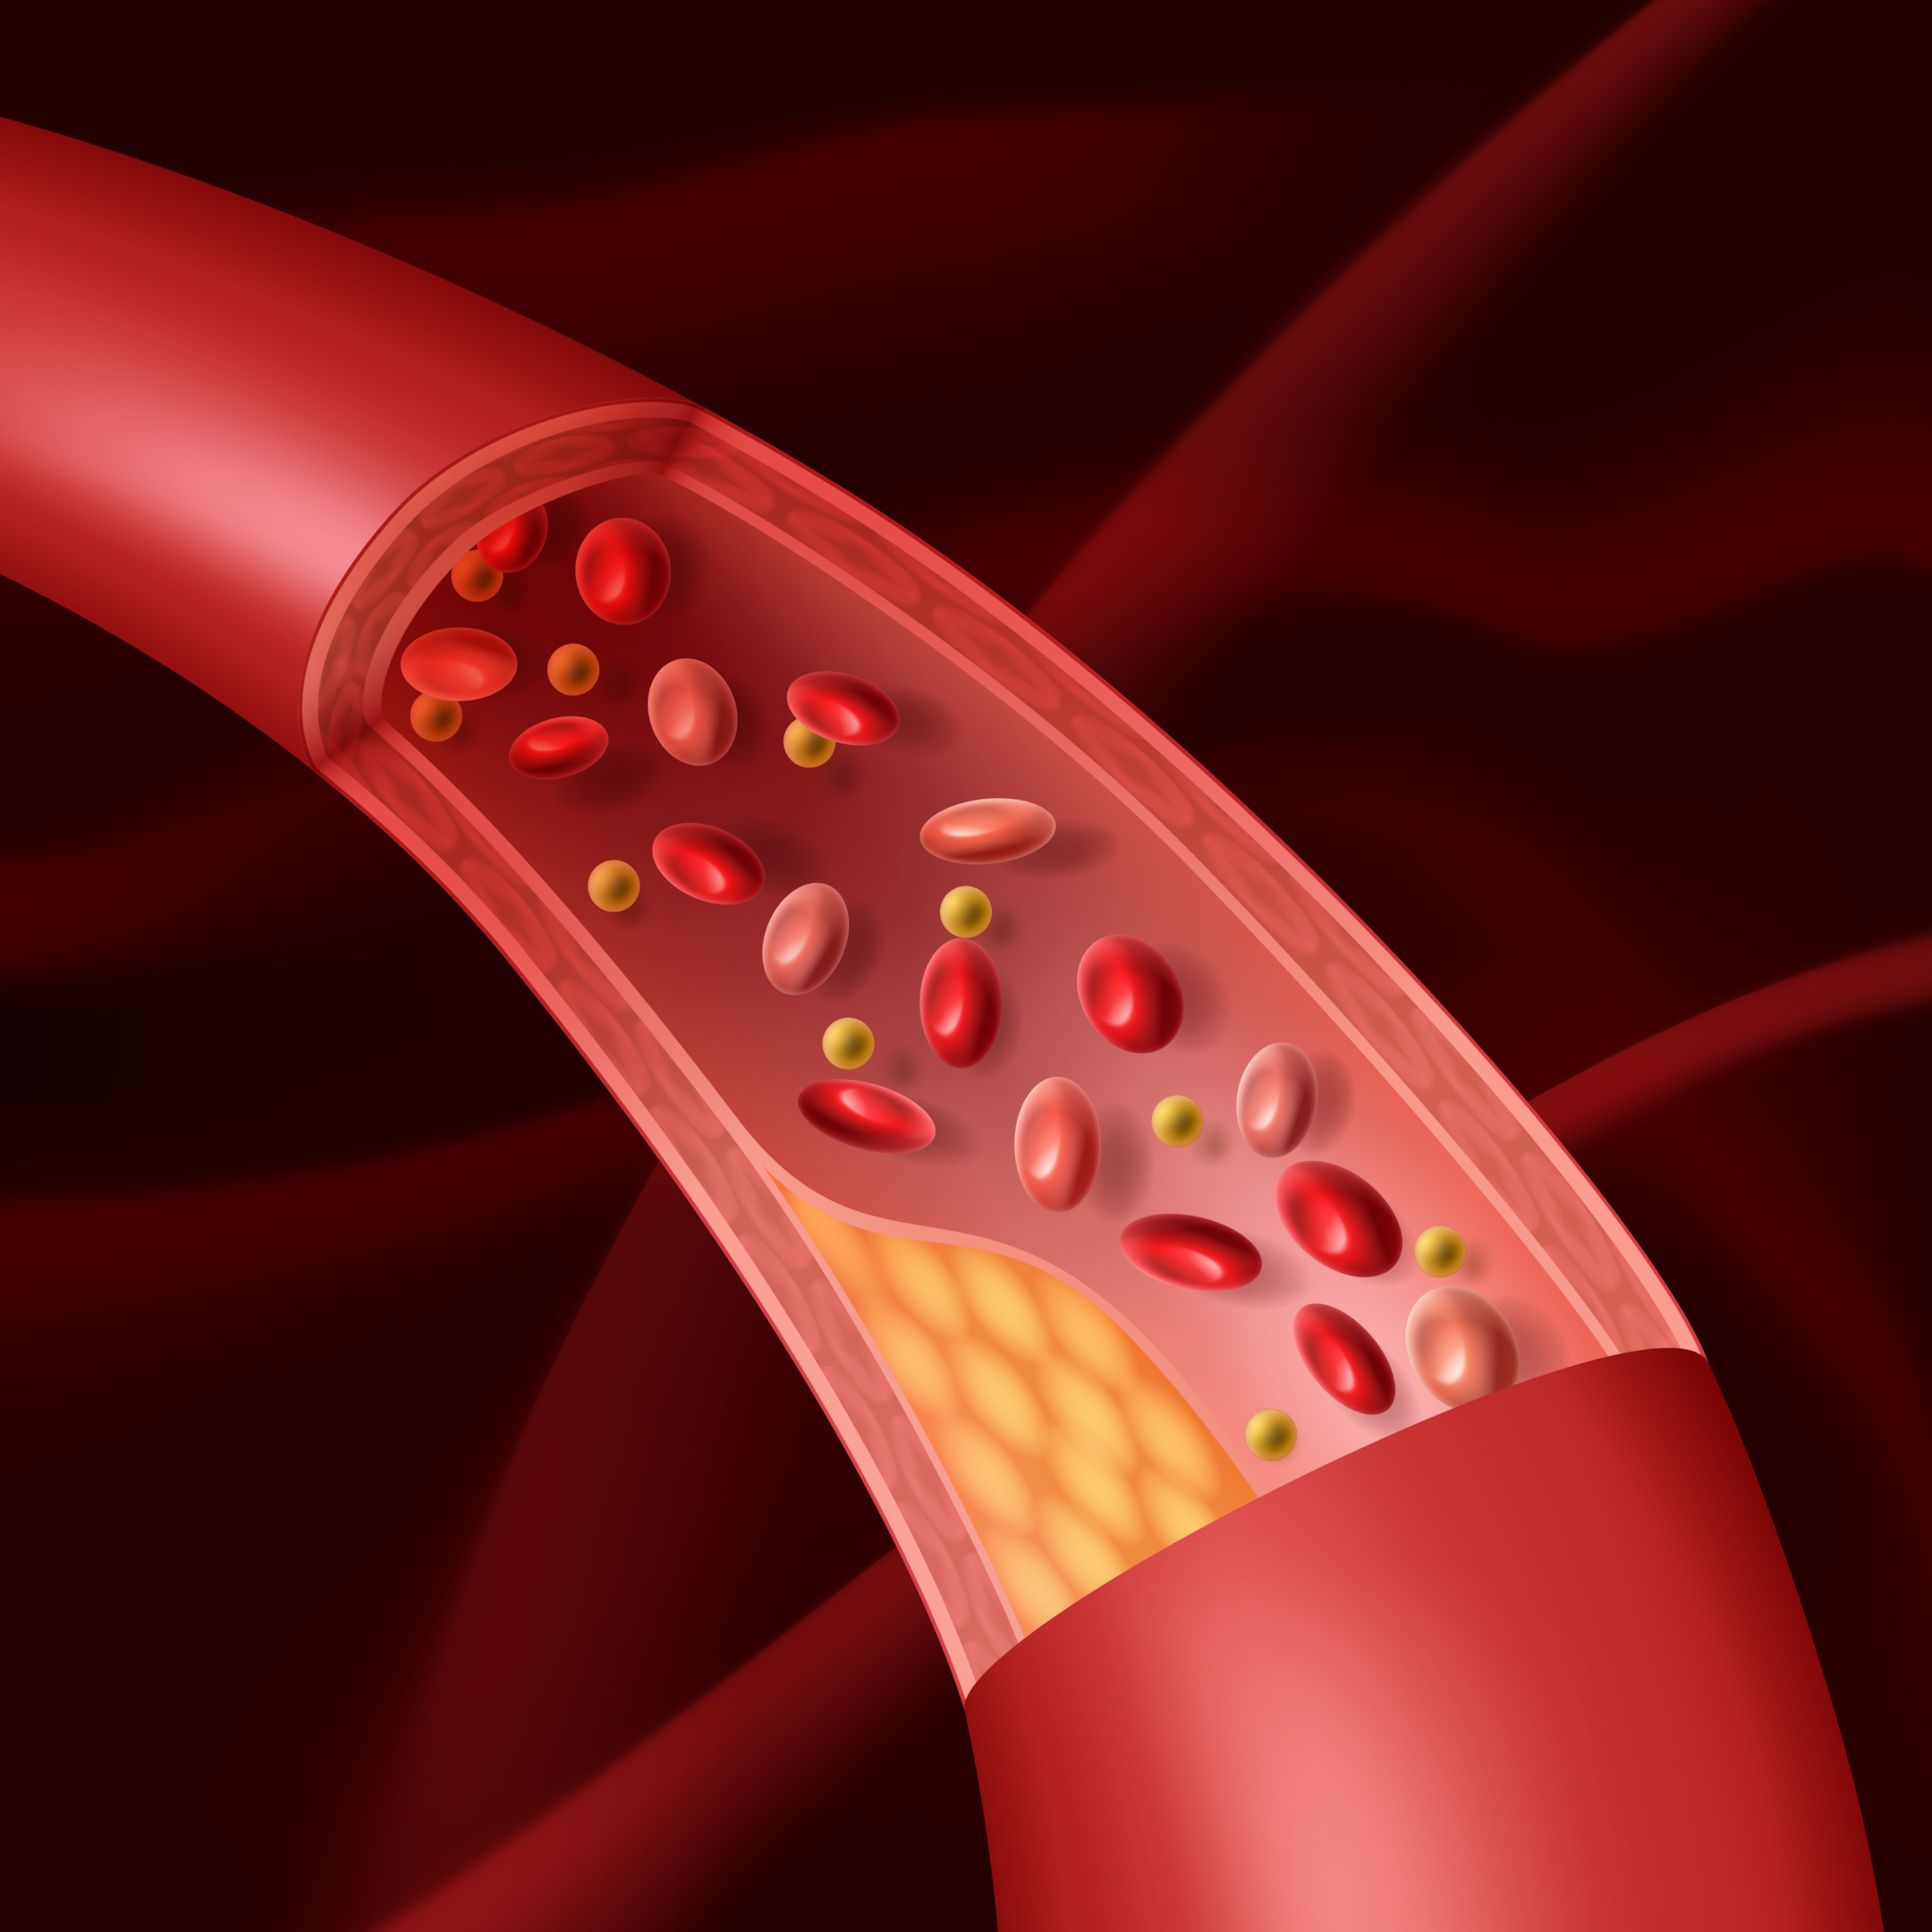 The cholesterol will accumulate in the blood vessels to produce plaques.